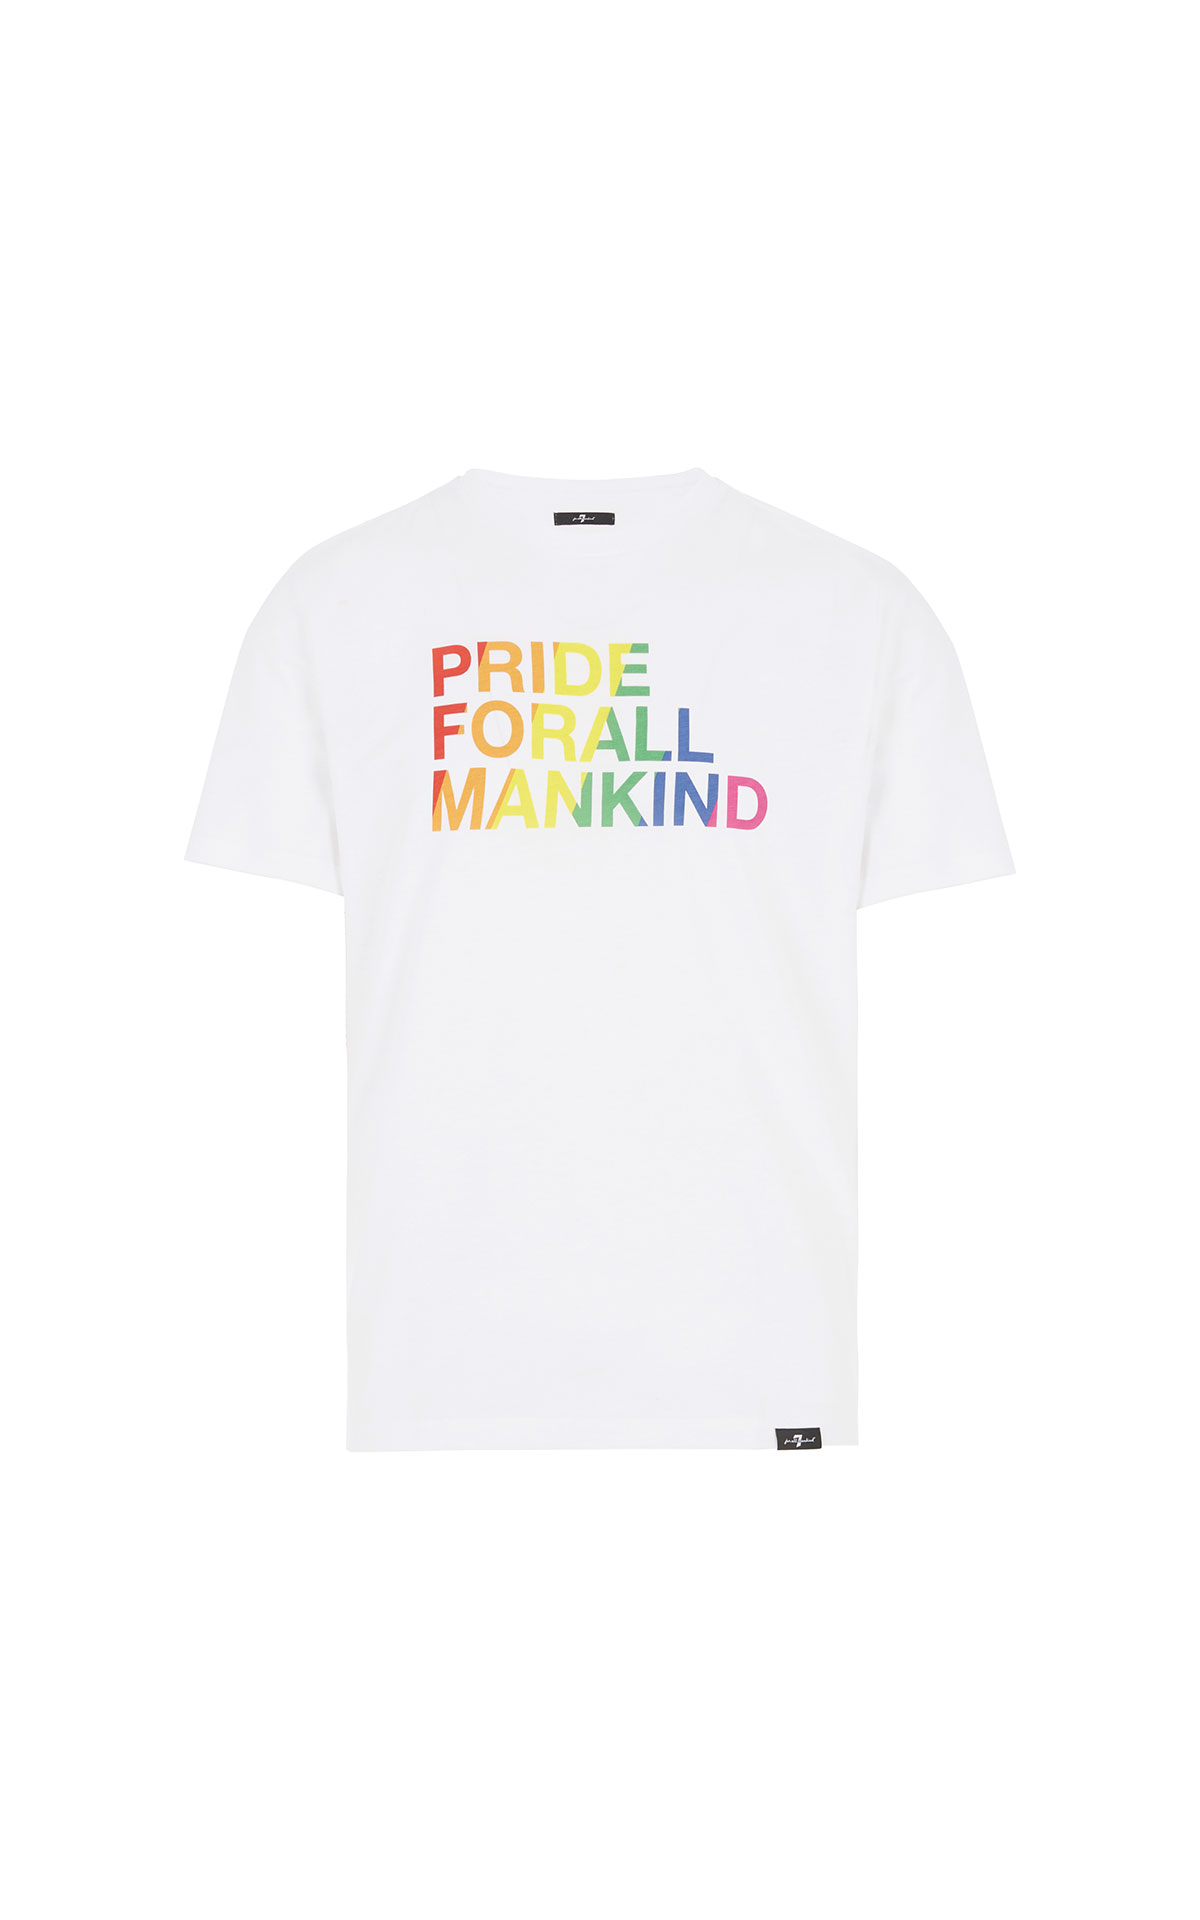 7 For all Mankind Graphic tee jersey for Pride from Bicester Village